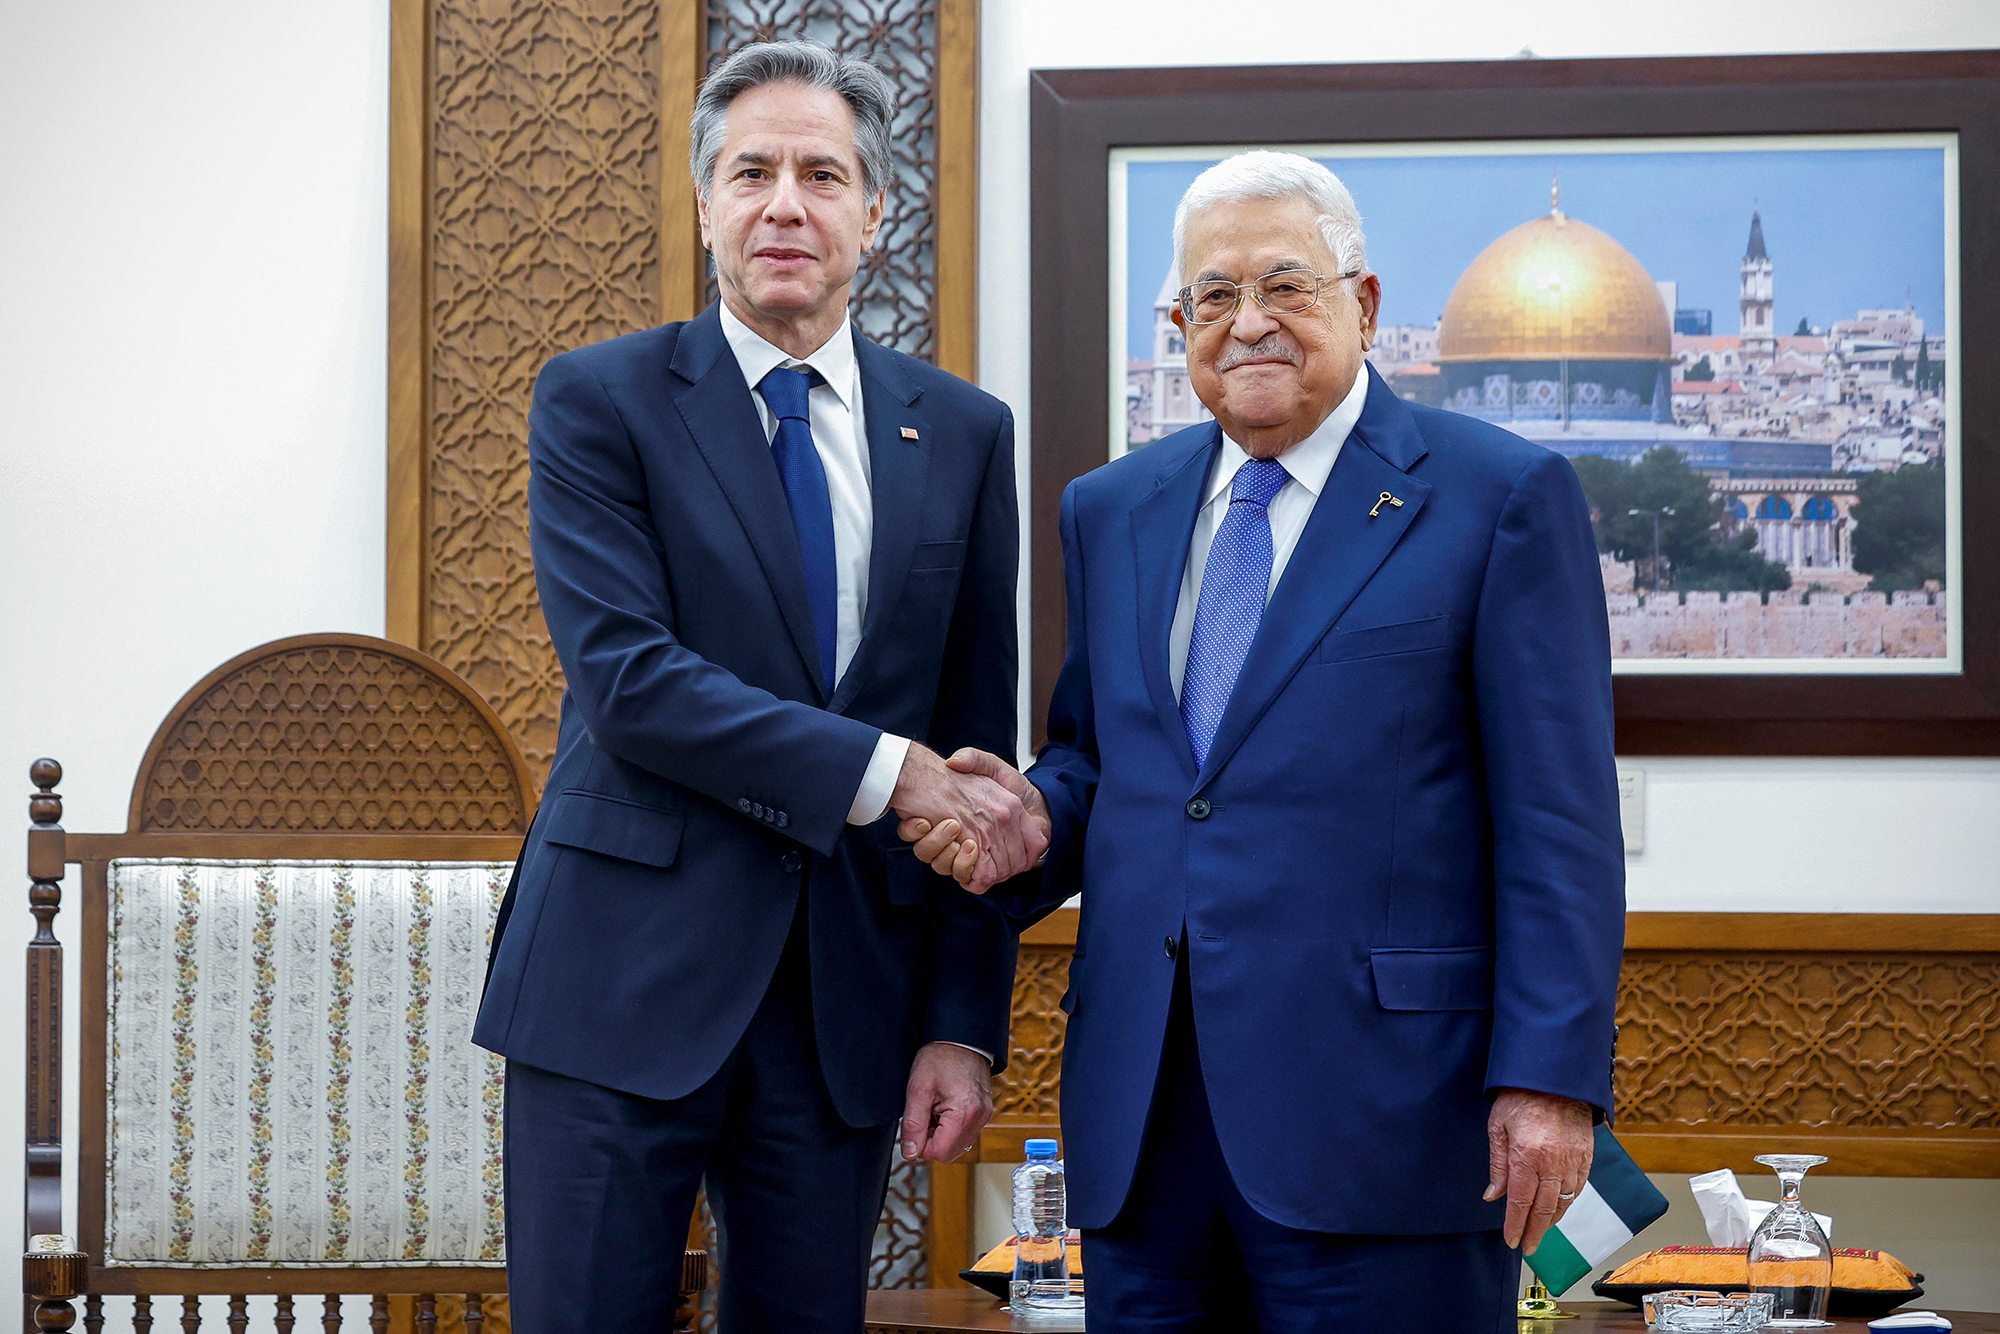 U.S. Secretary of State Antony Blinken, left, meets with Palestinian President Mahmoud Abbas in the Muqata'a, Ramallah, in the Israeli-occupied West Bank on January 10.